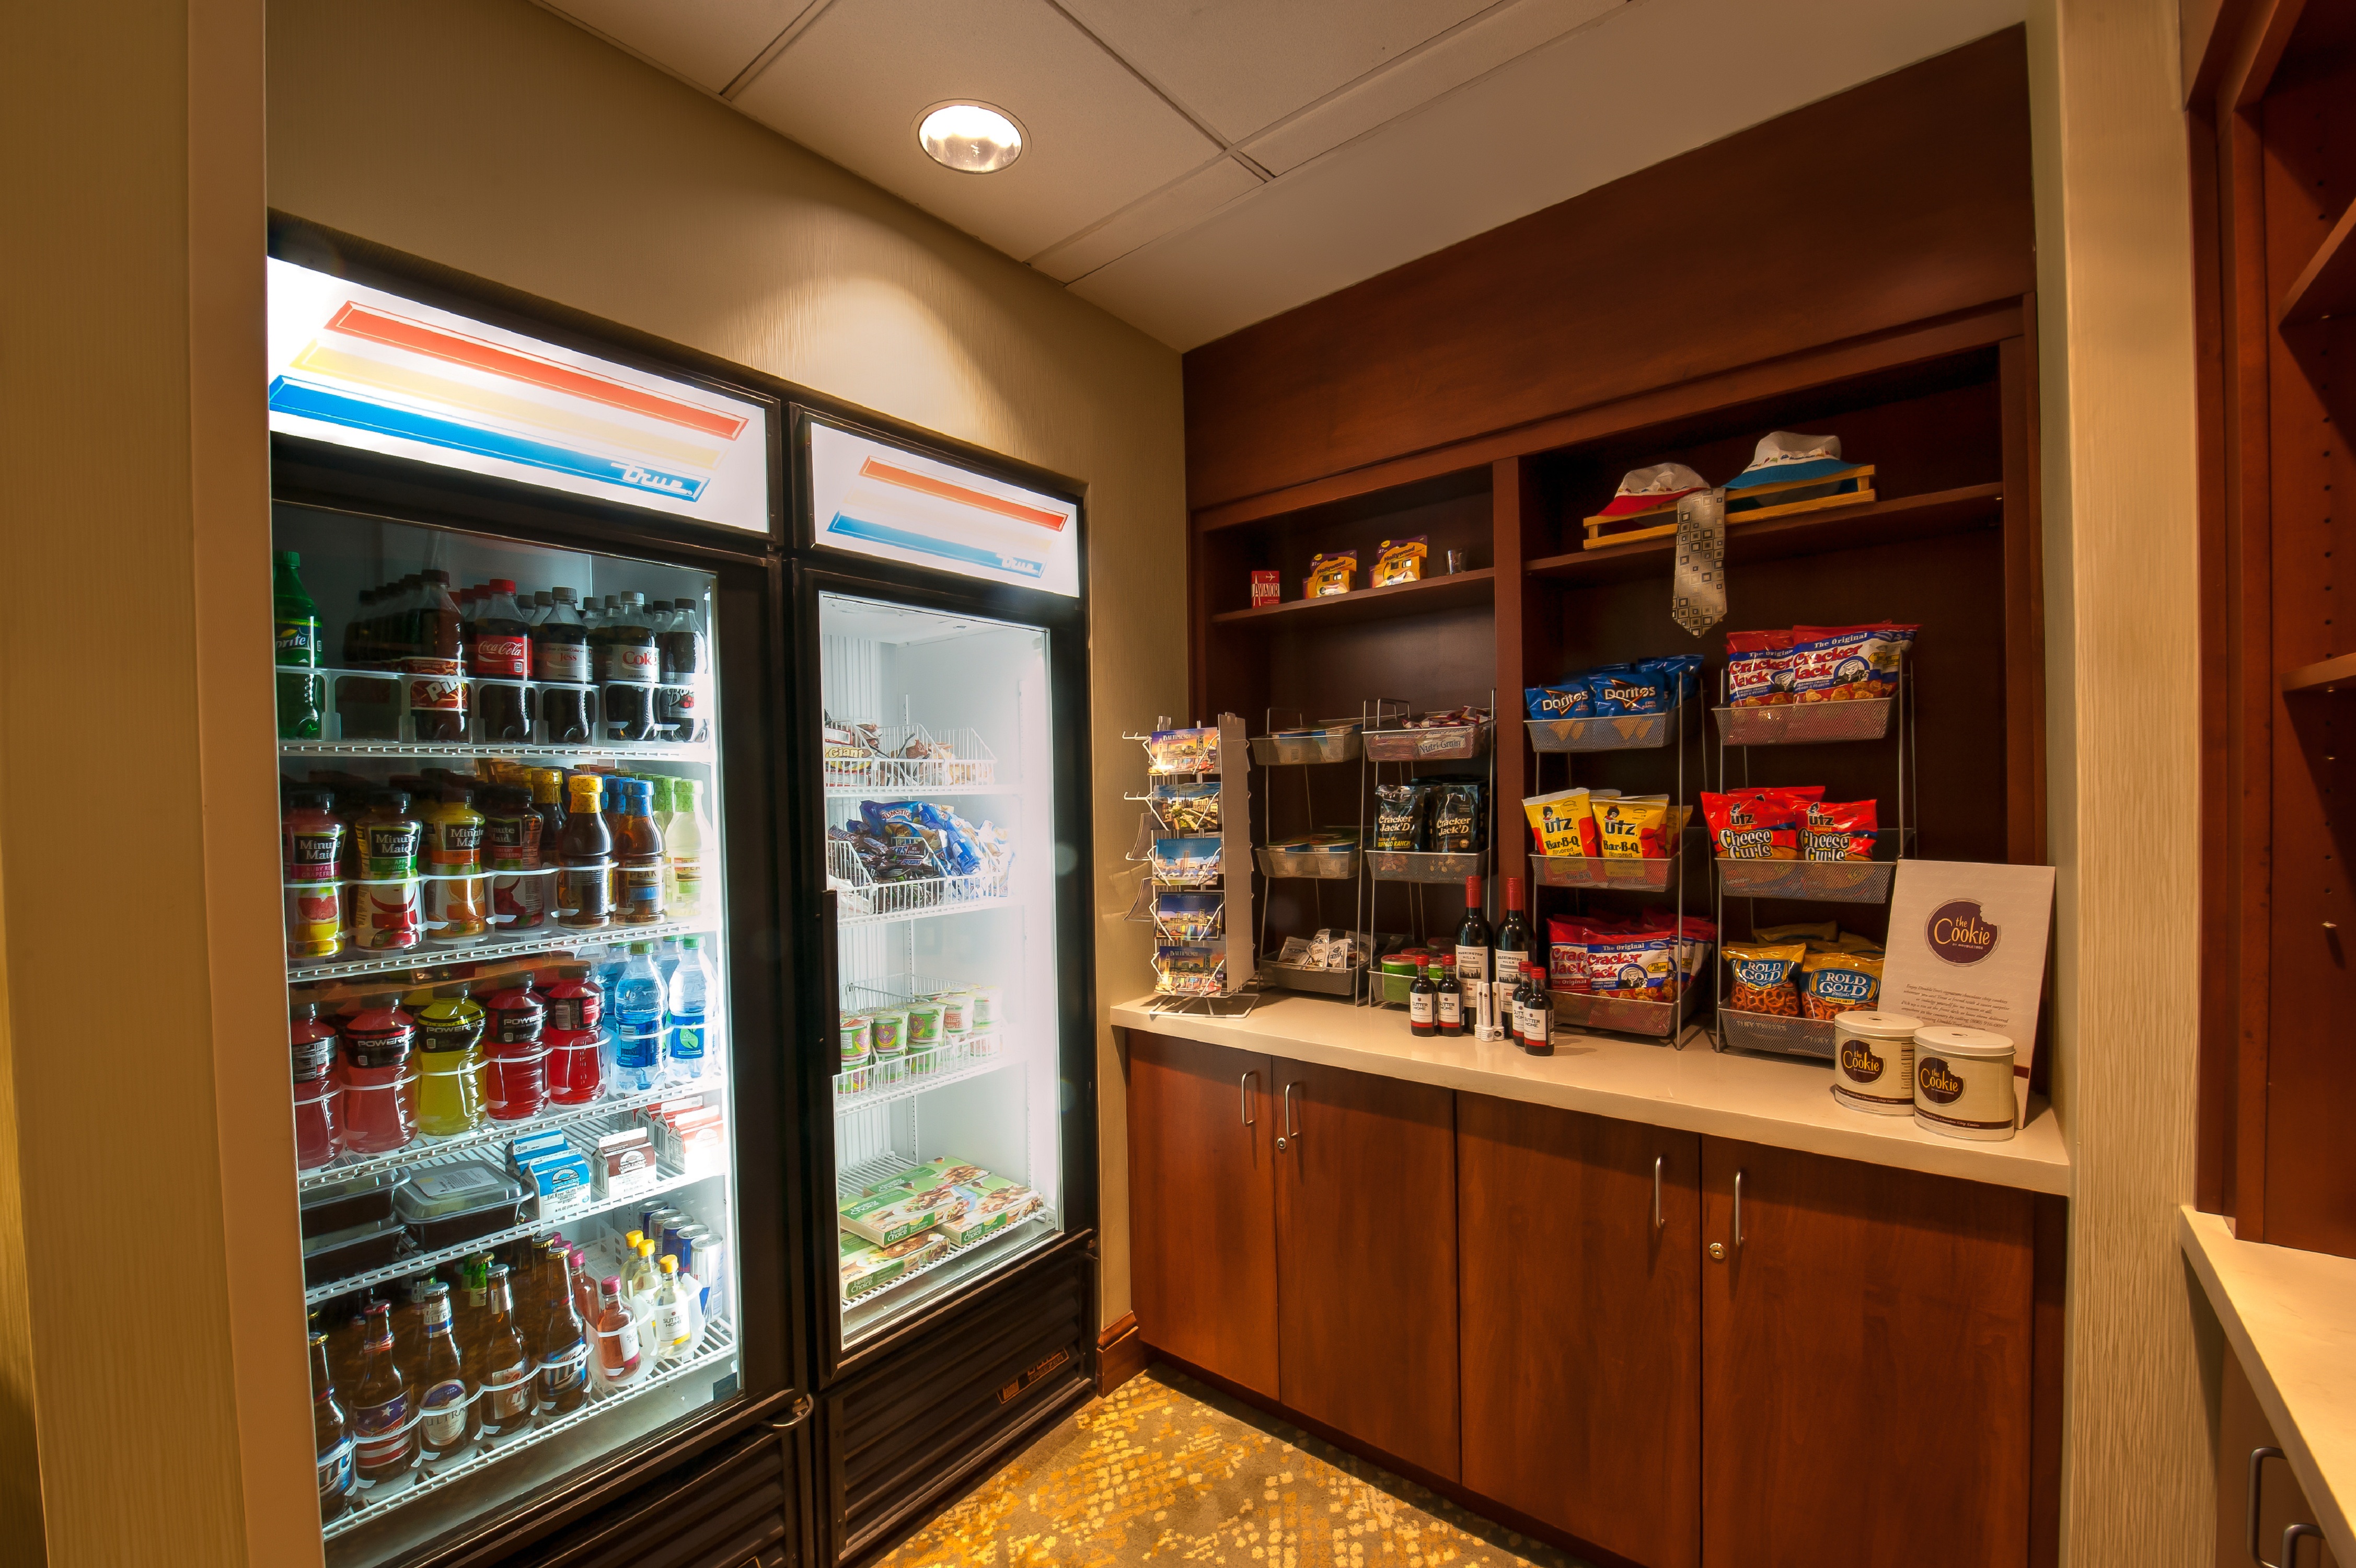 View of Cold Beverage, Snacks and Convenience Items for Guest Purchase in Pantry